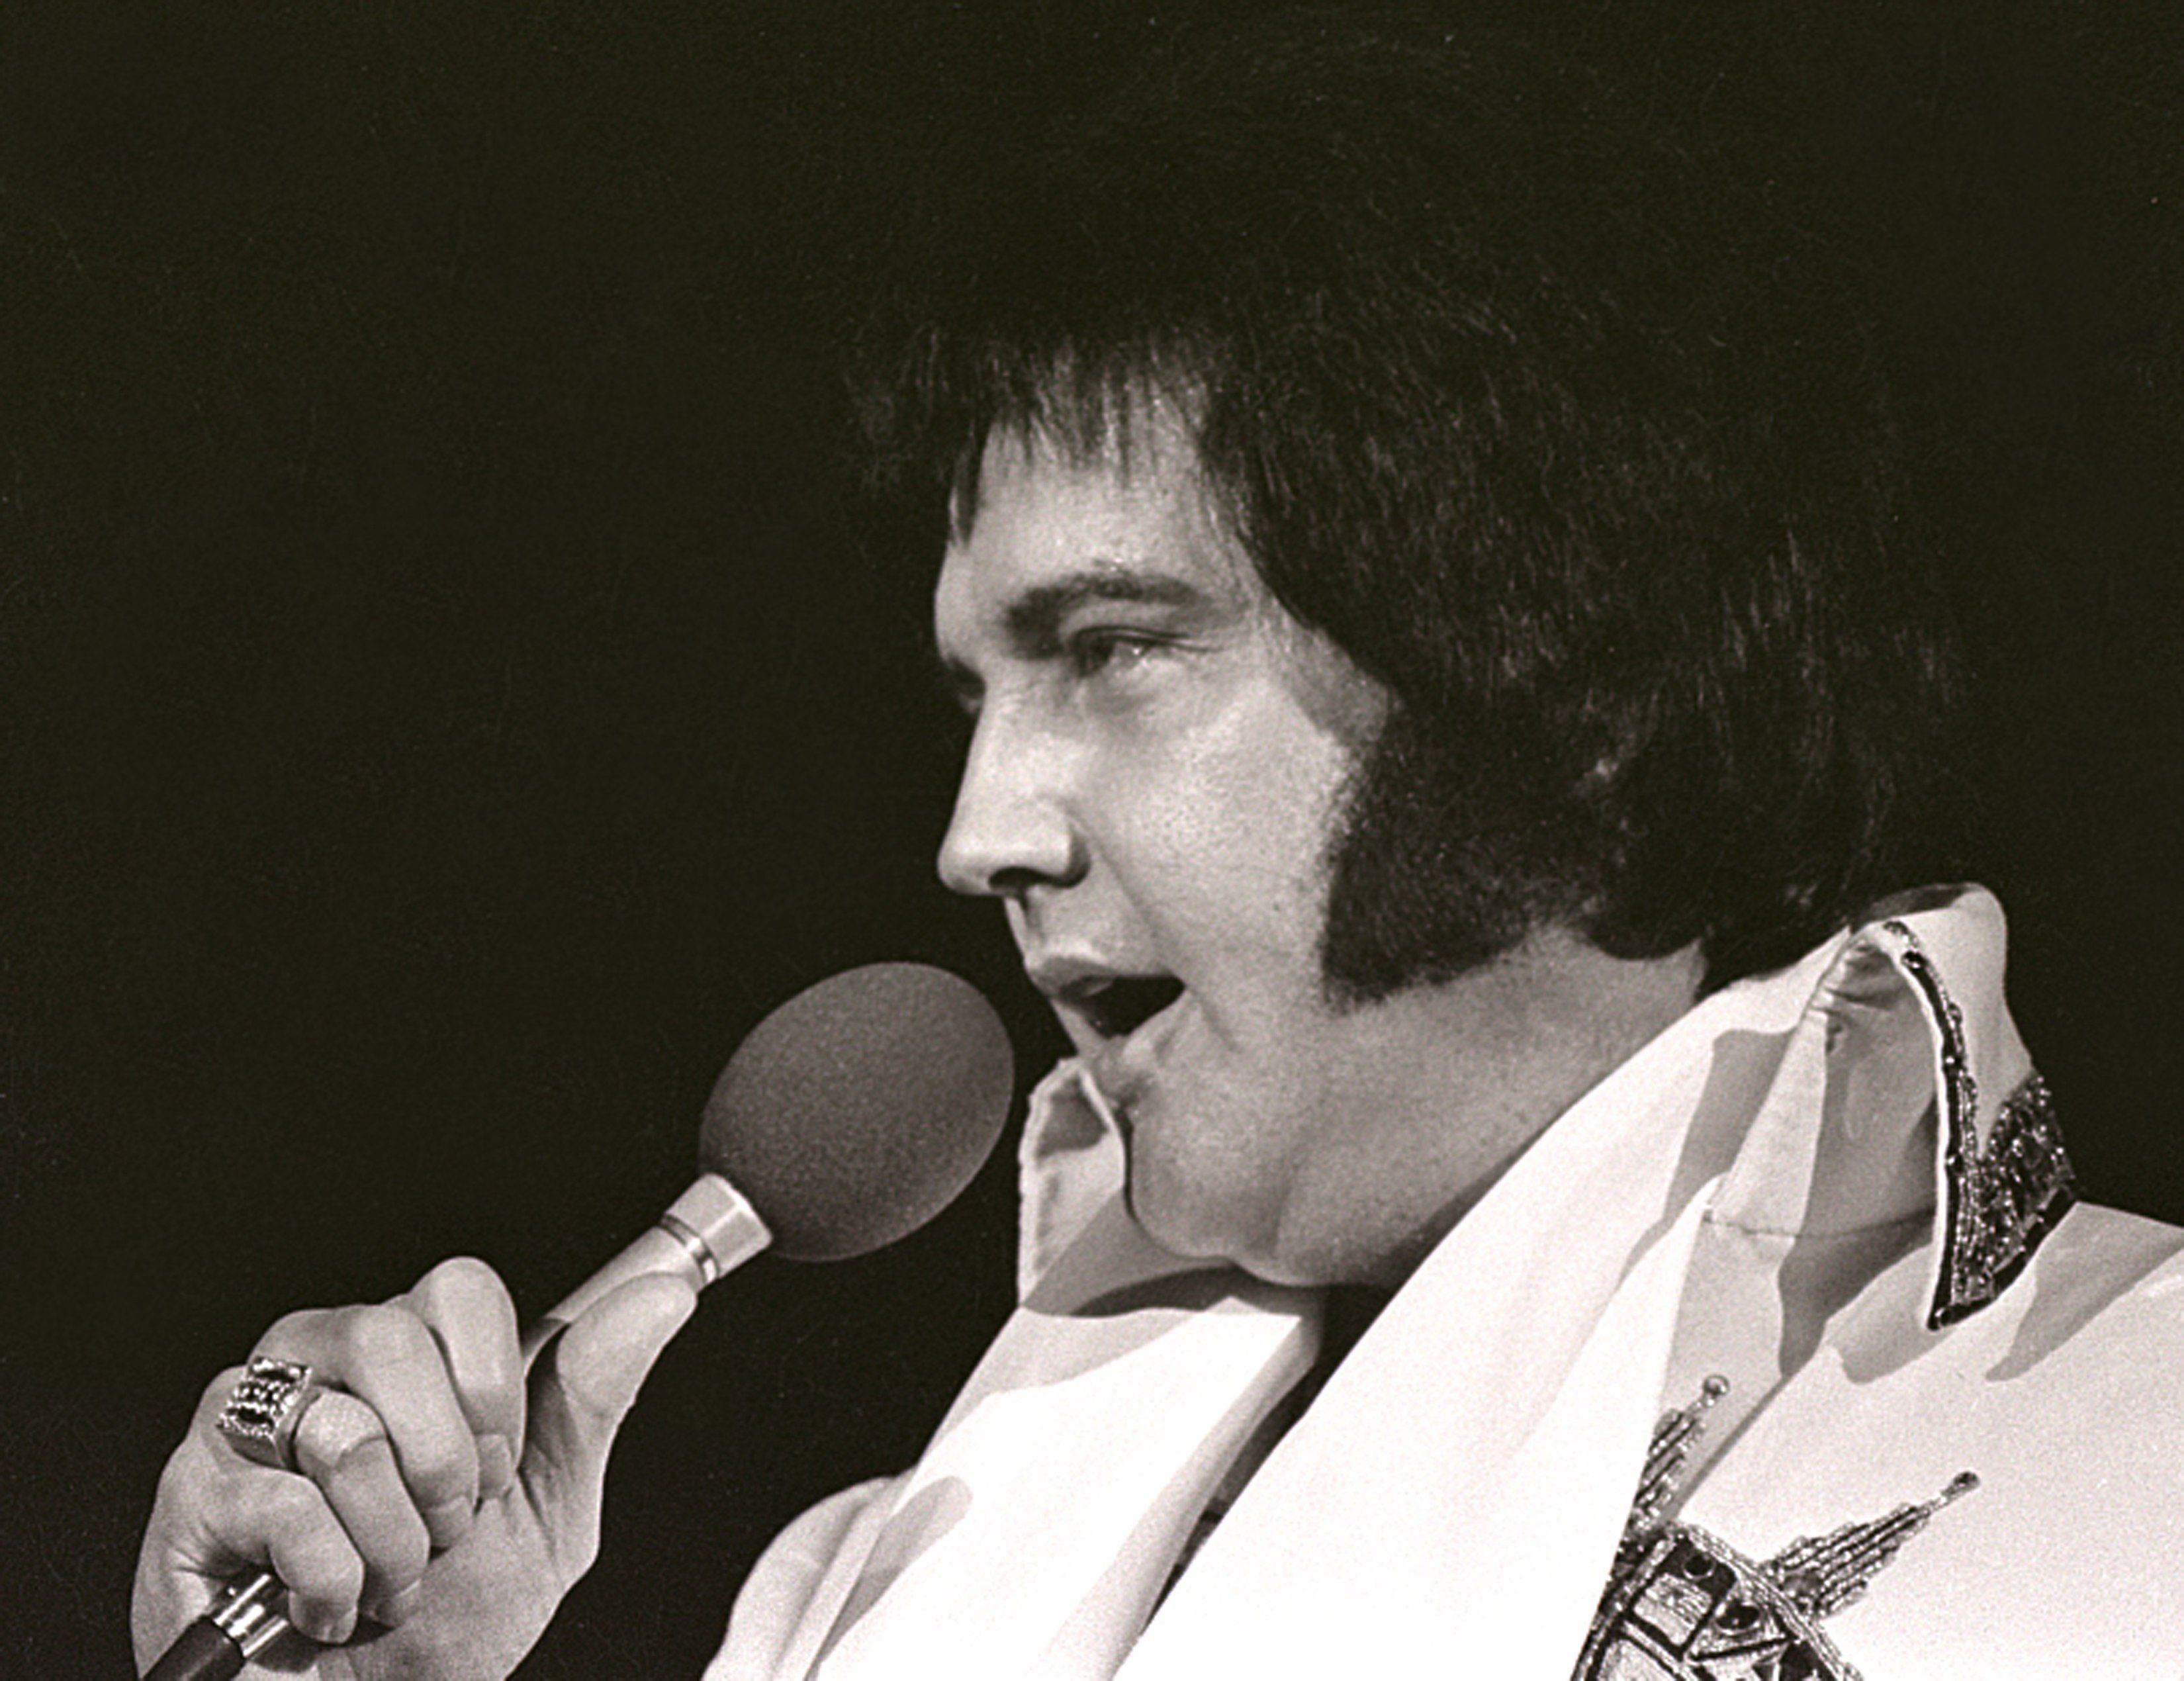 Elvis Presley performs in concert at the Milwaukee Arena on April 27, l977, just months before his death | Source: Getty Images